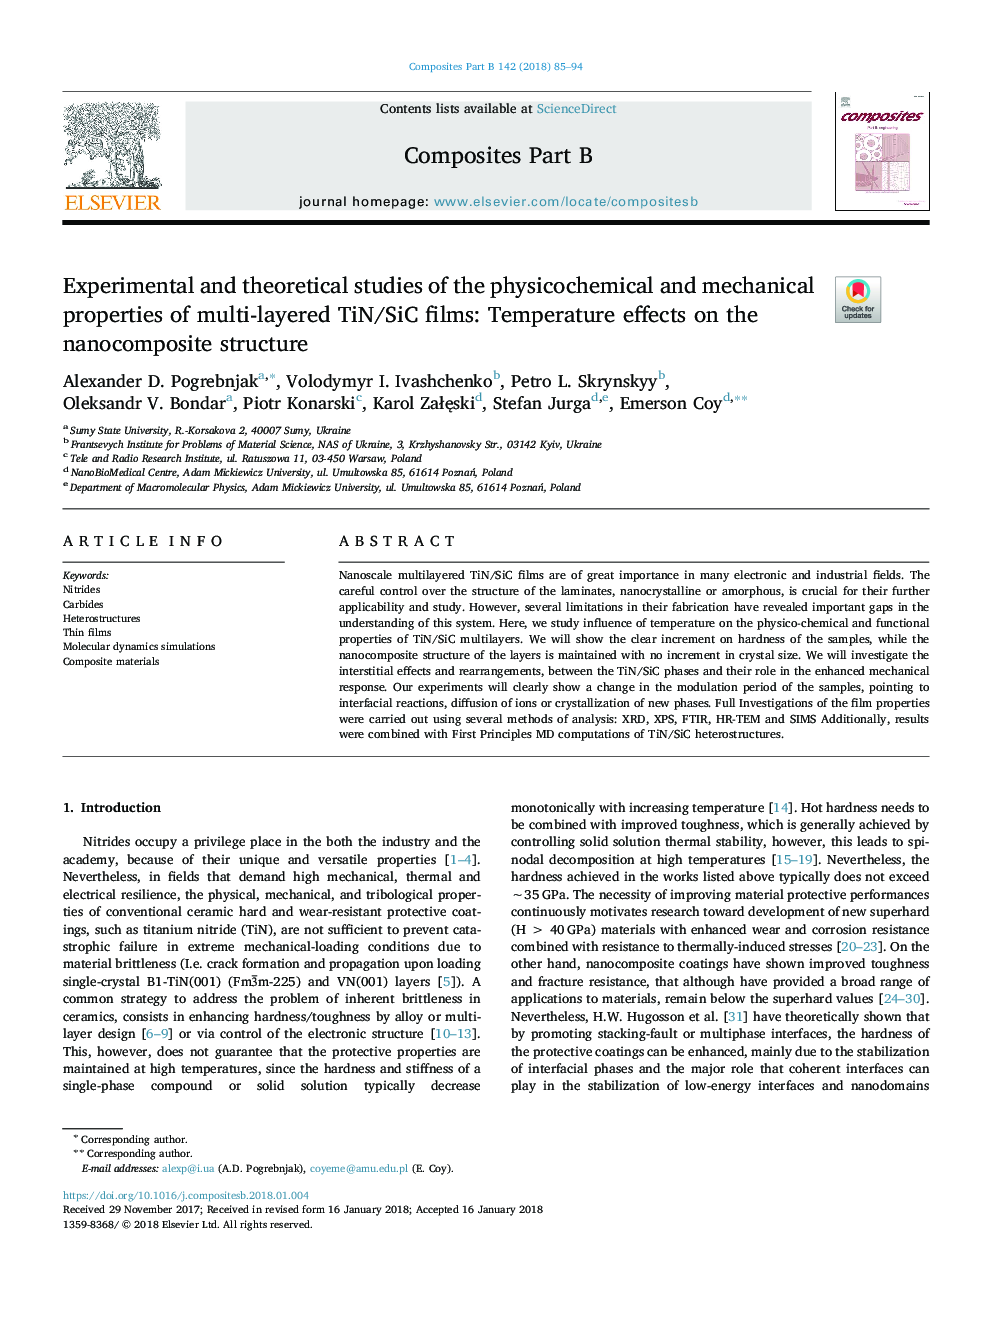 Experimental and theoretical studies of the physicochemical and mechanical properties of multi-layered TiN/SiC films: Temperature effects on the nanocomposite structure